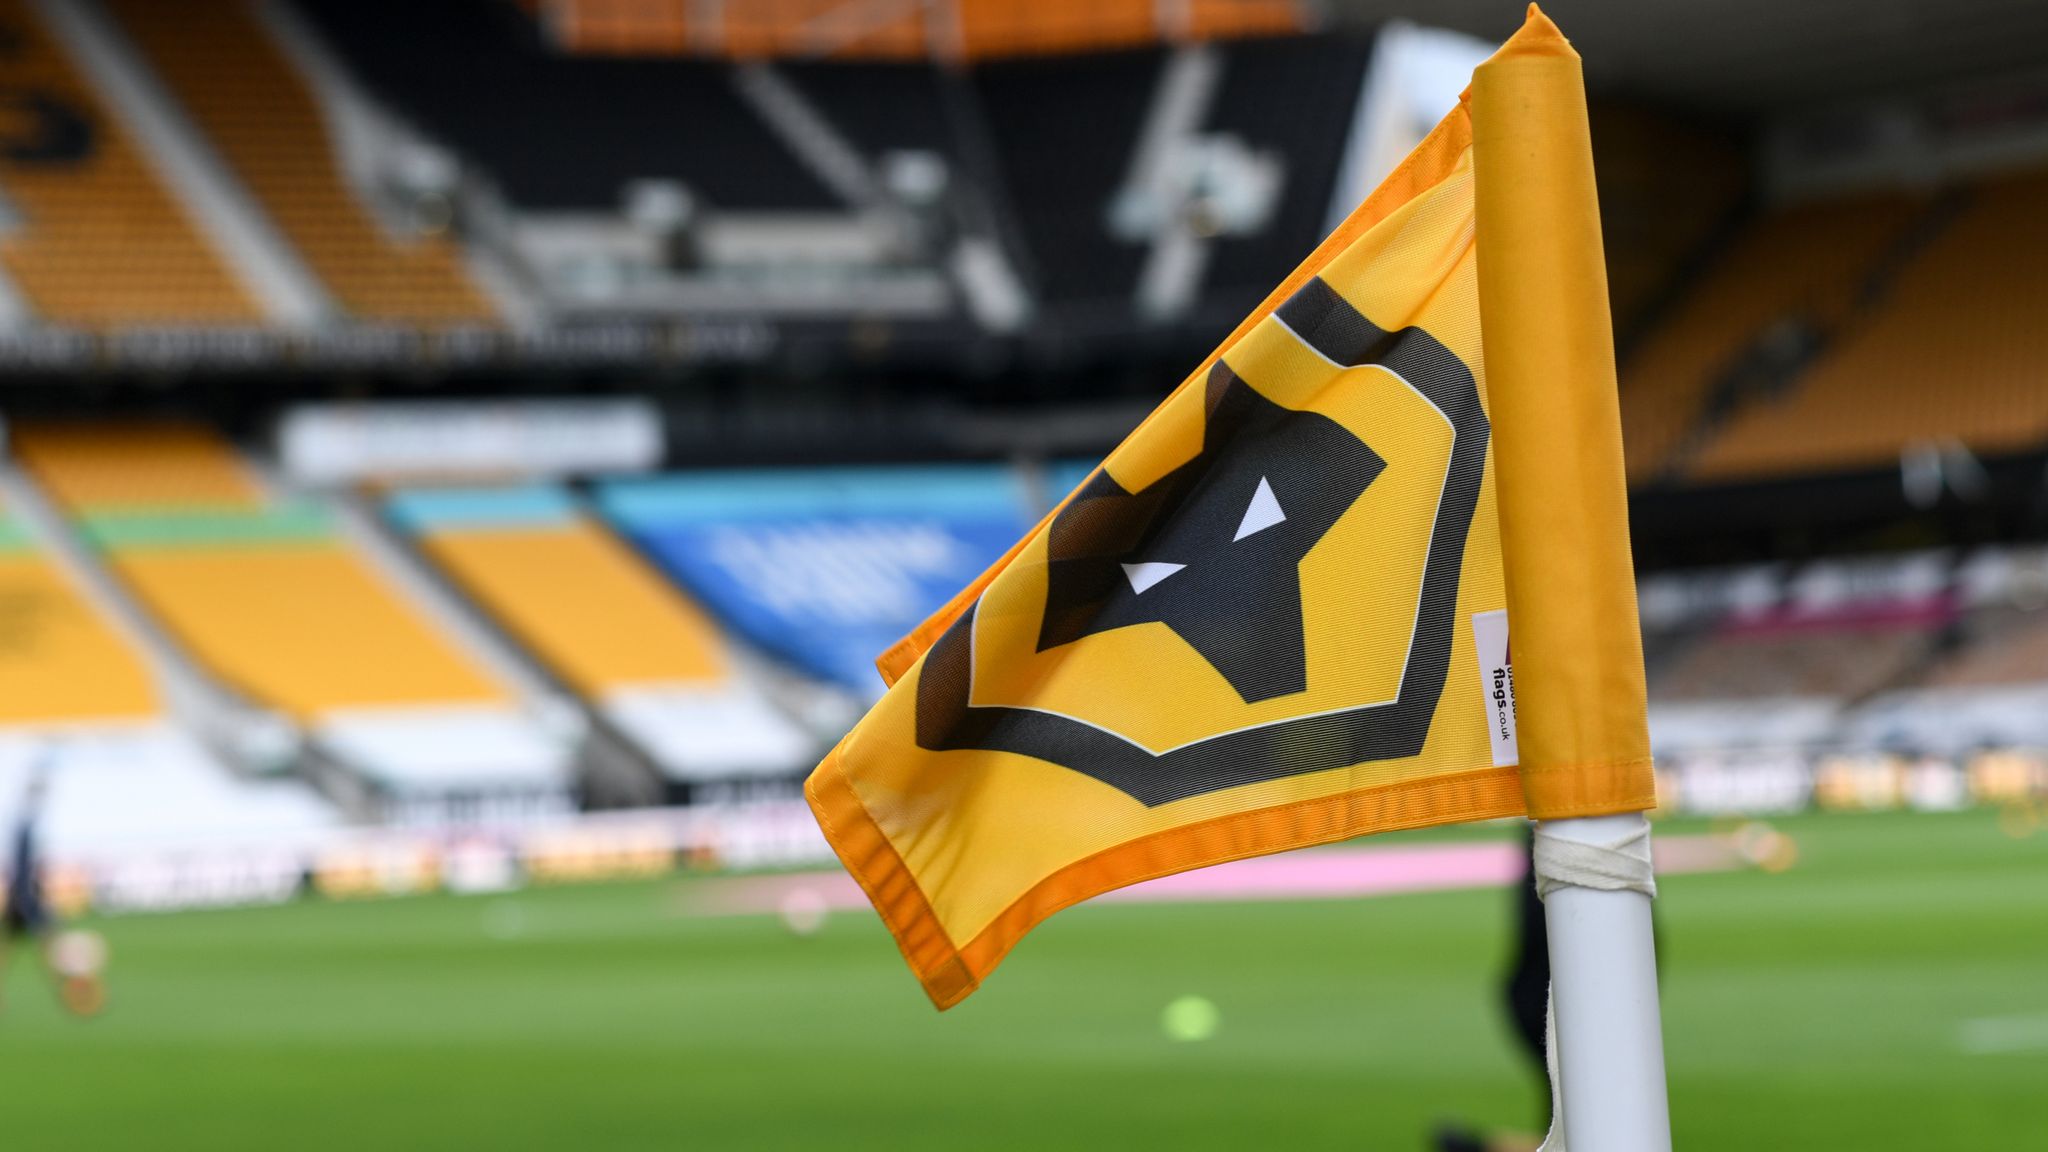 According to BBC report: O’Neil could turn Wolves star into a phenomenon by copying £40m Newcastle player’s arc…..